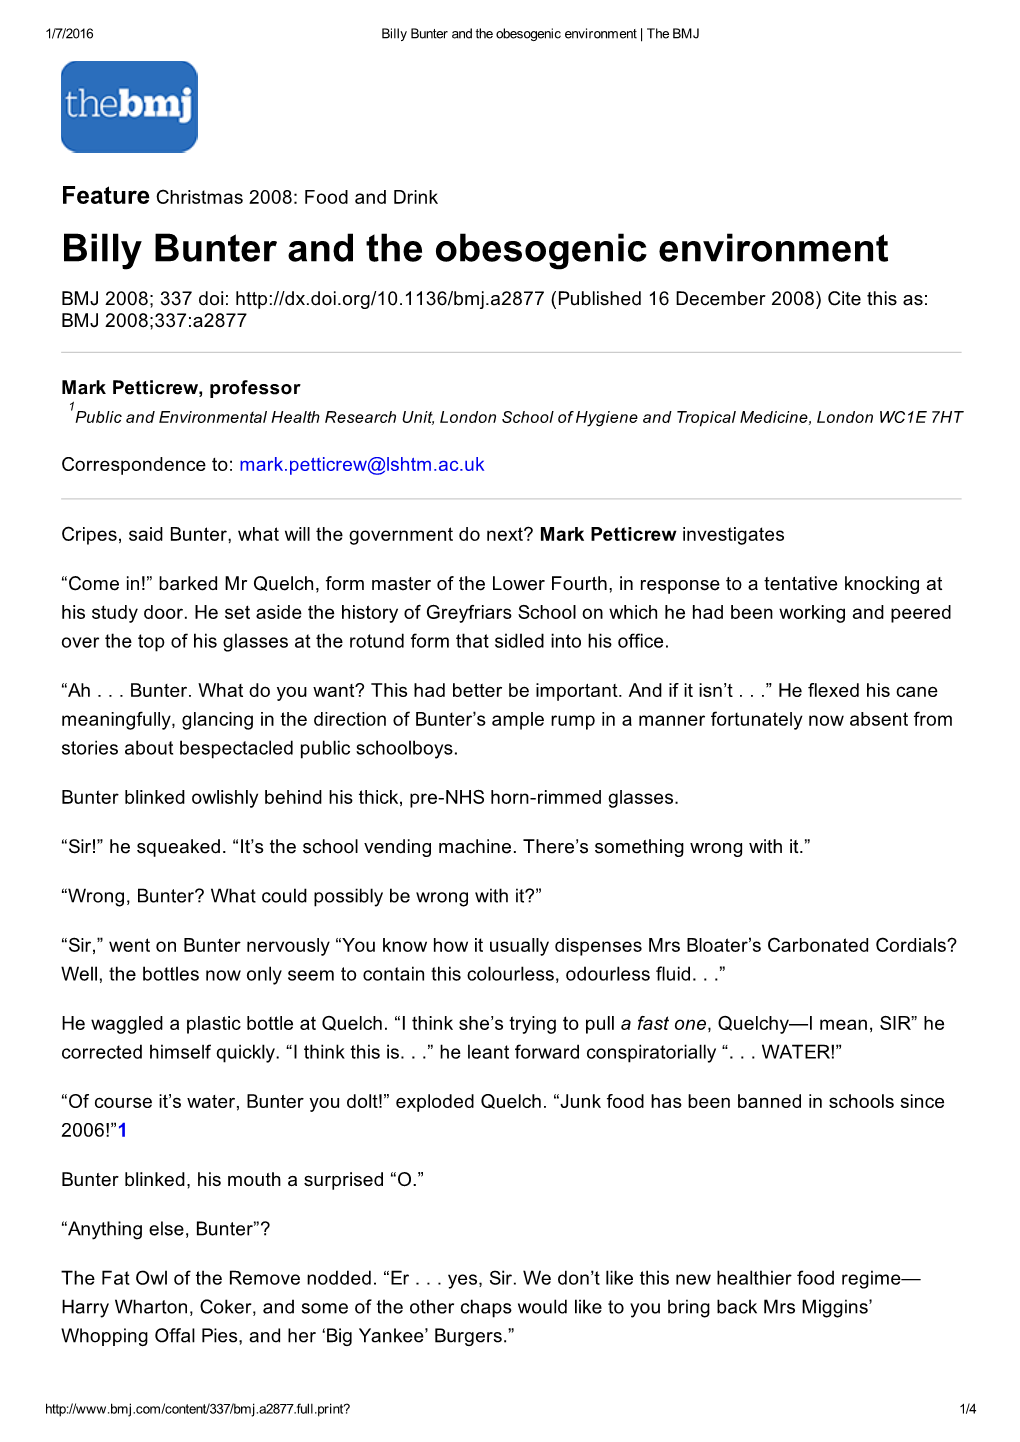 Billy Bunter and the Obesogenic Environment | the BMJ